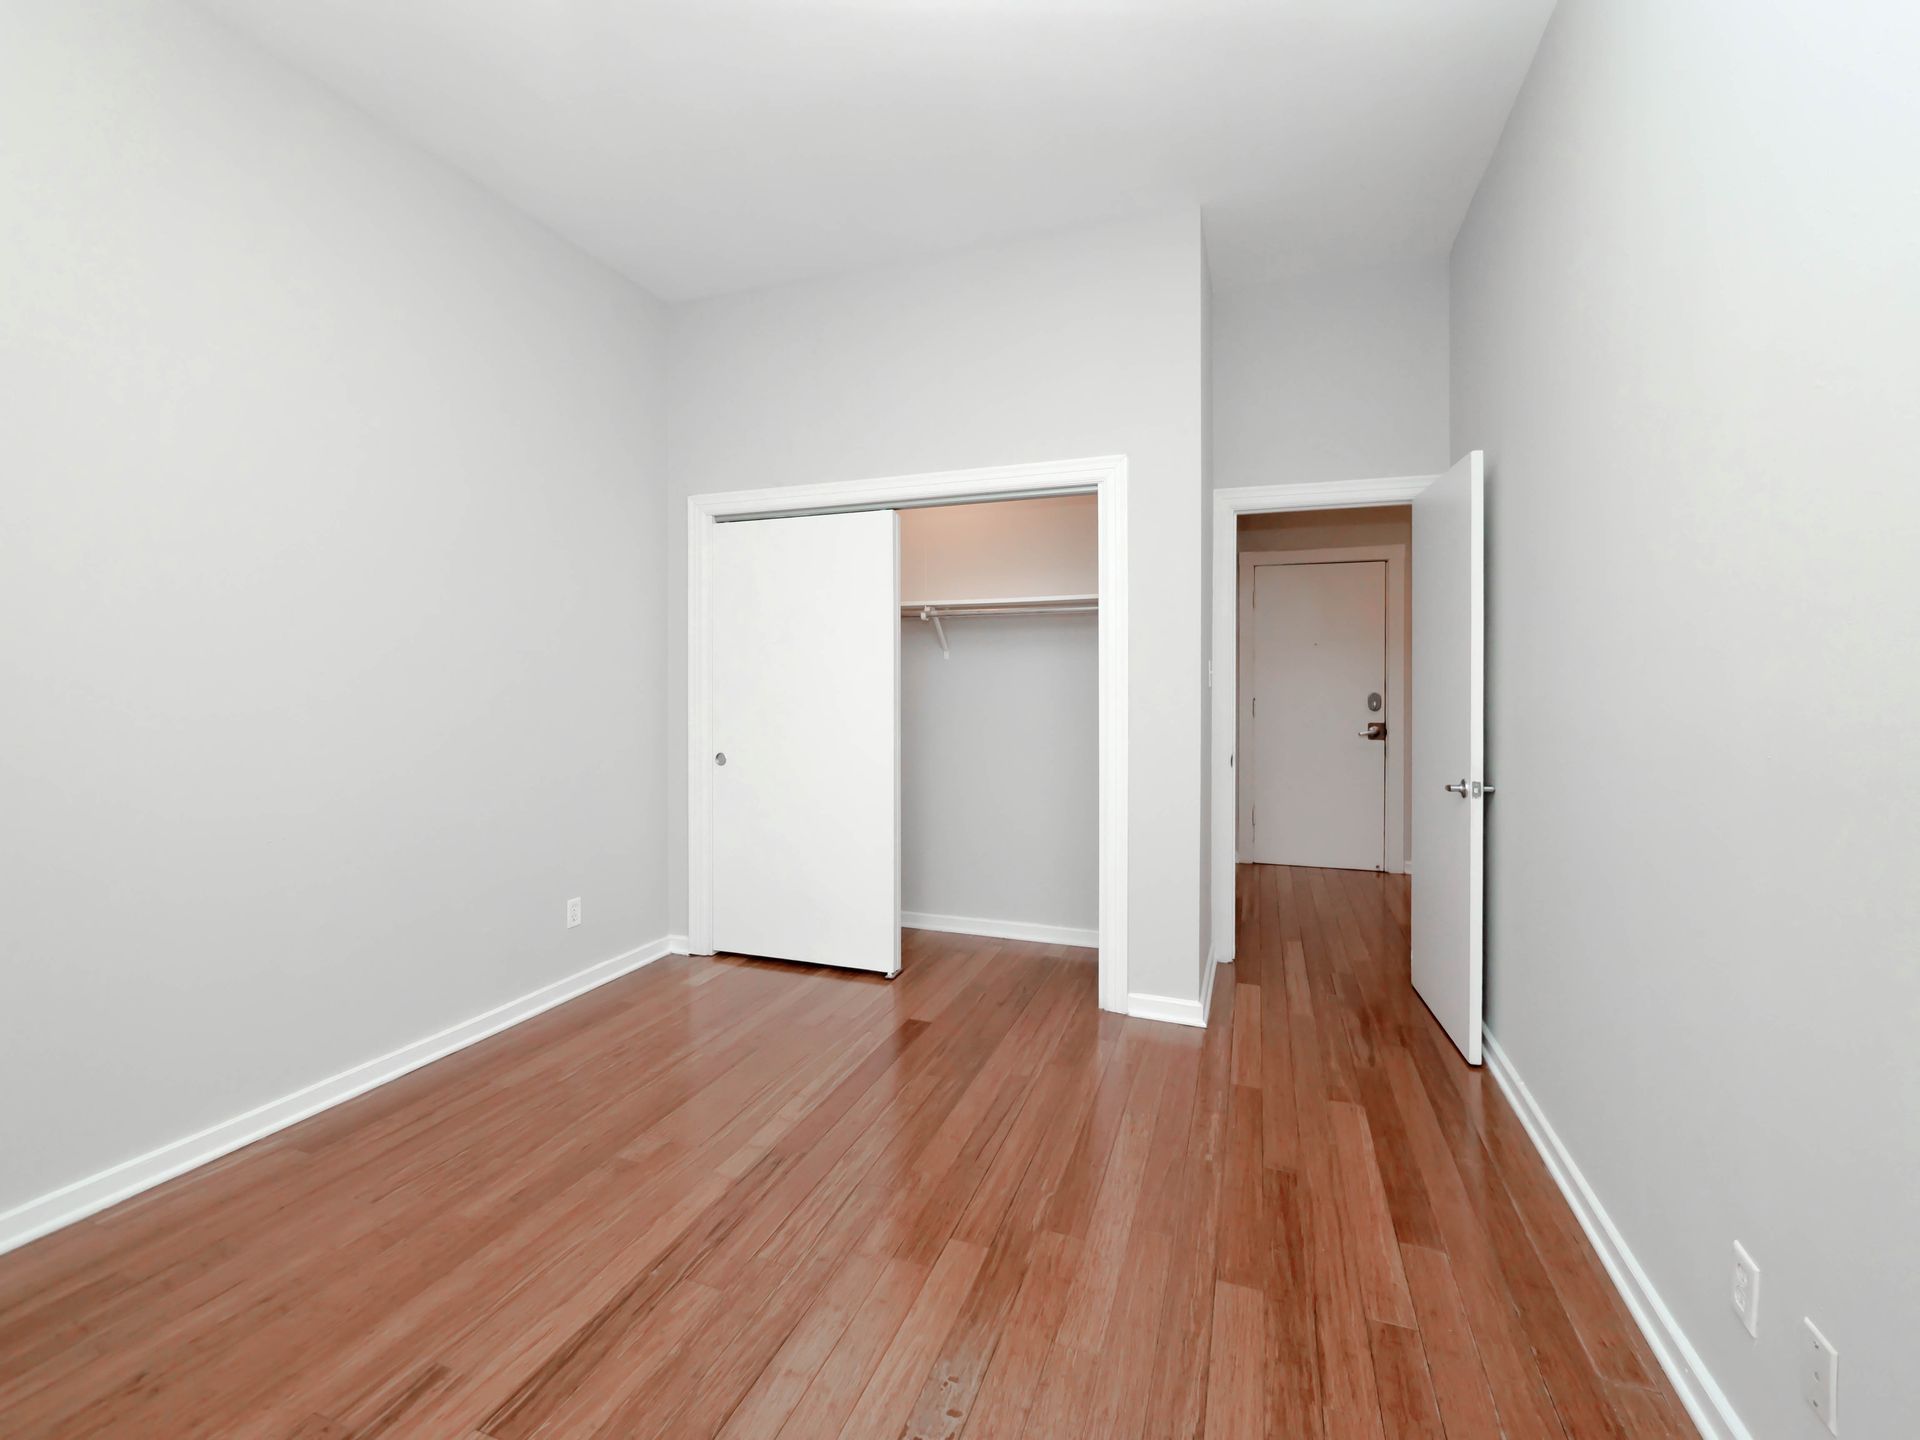 An empty bedroom with hardwood floors and white walls at Reside on Clark.